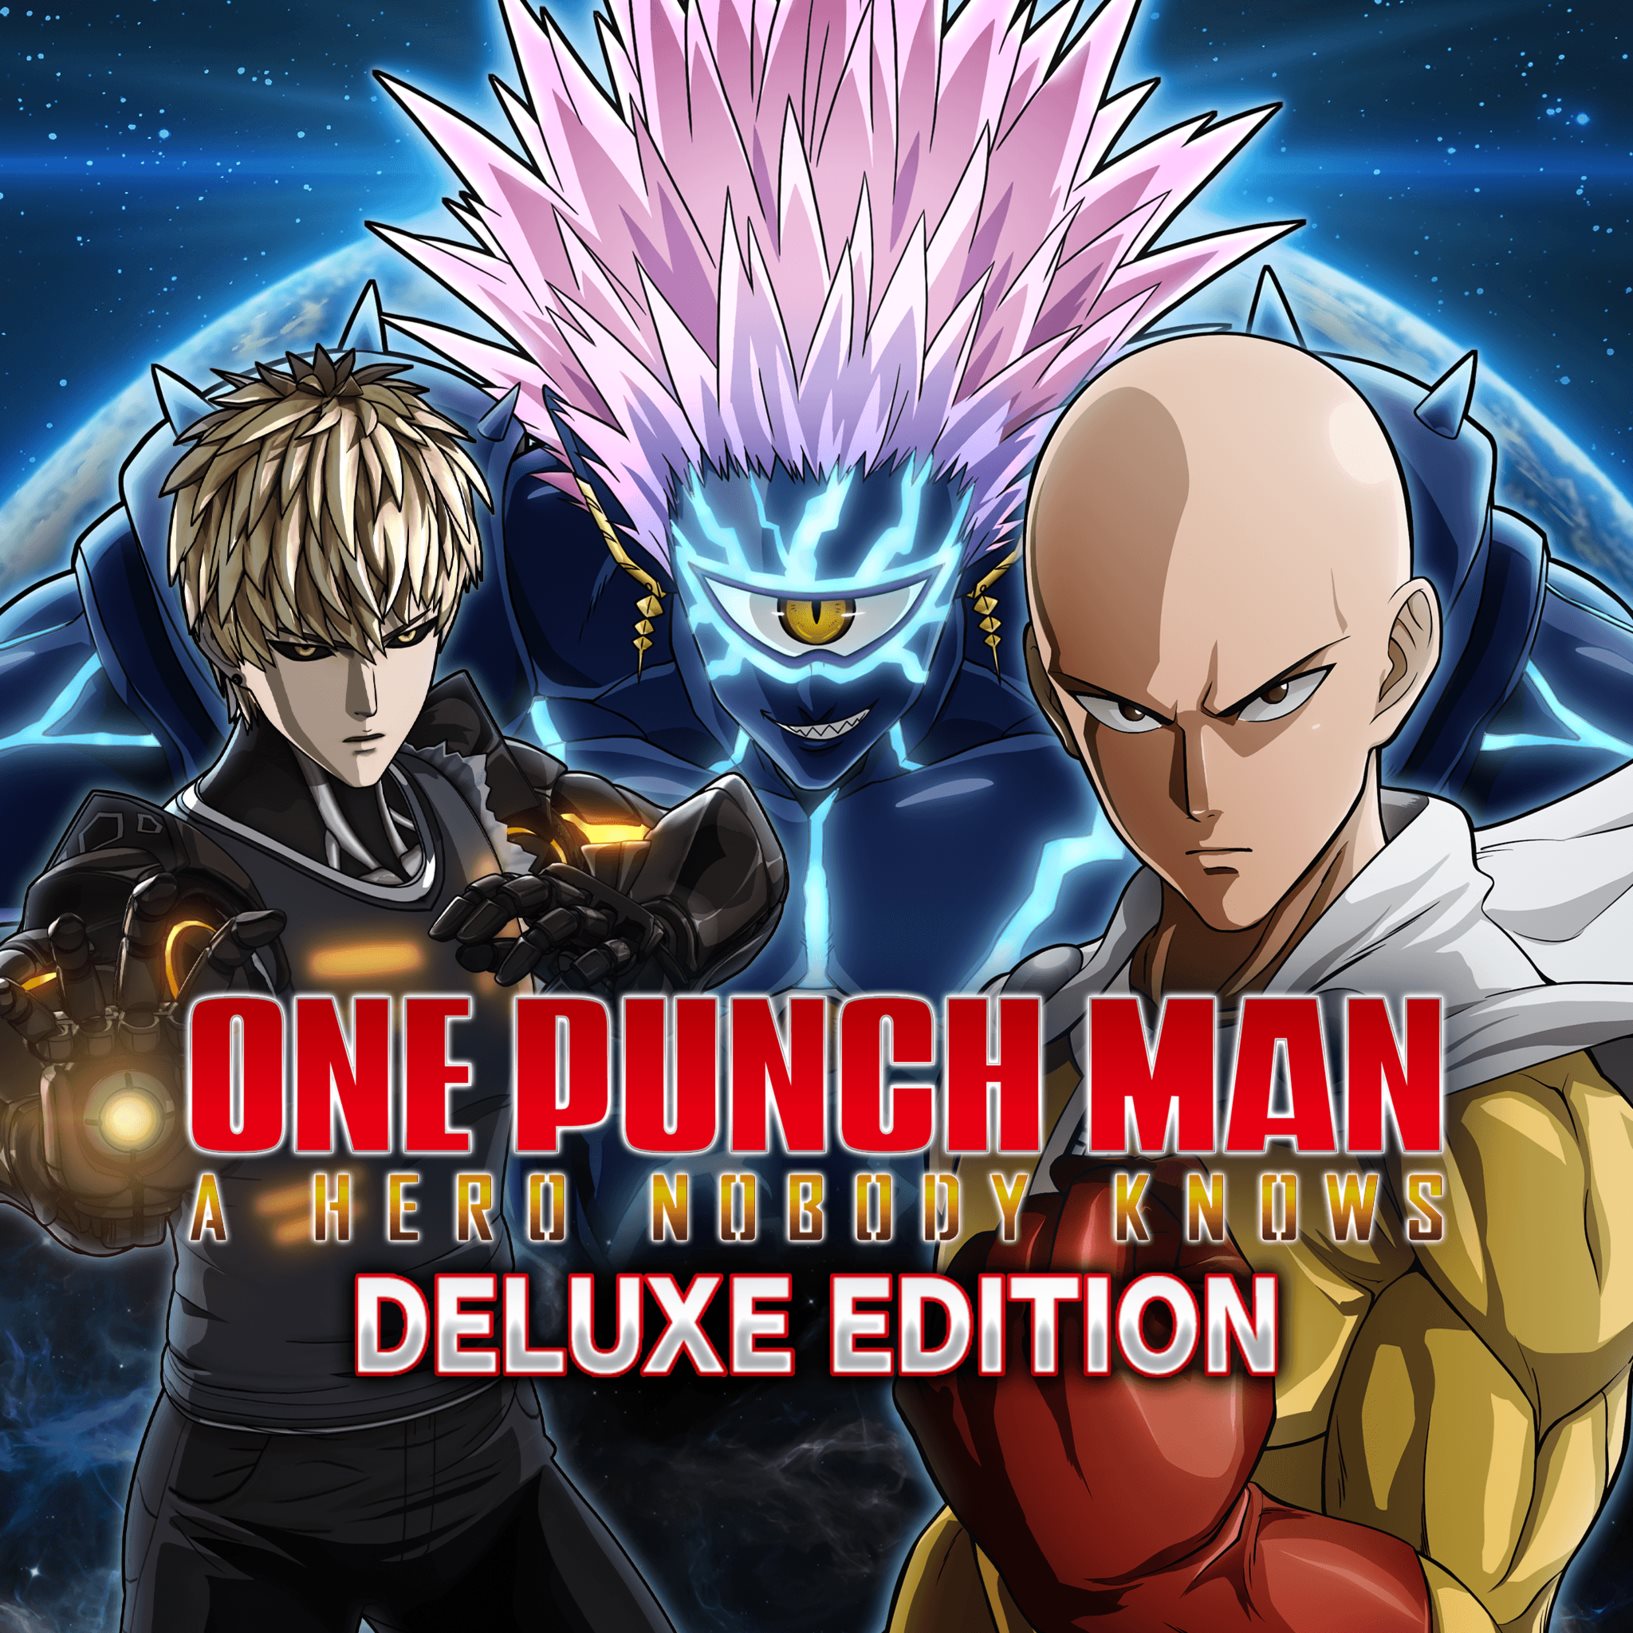 ONE PUNCH MAN: A HERO NOBODY KNOWS Deluxe Edition - PC DIGITAL